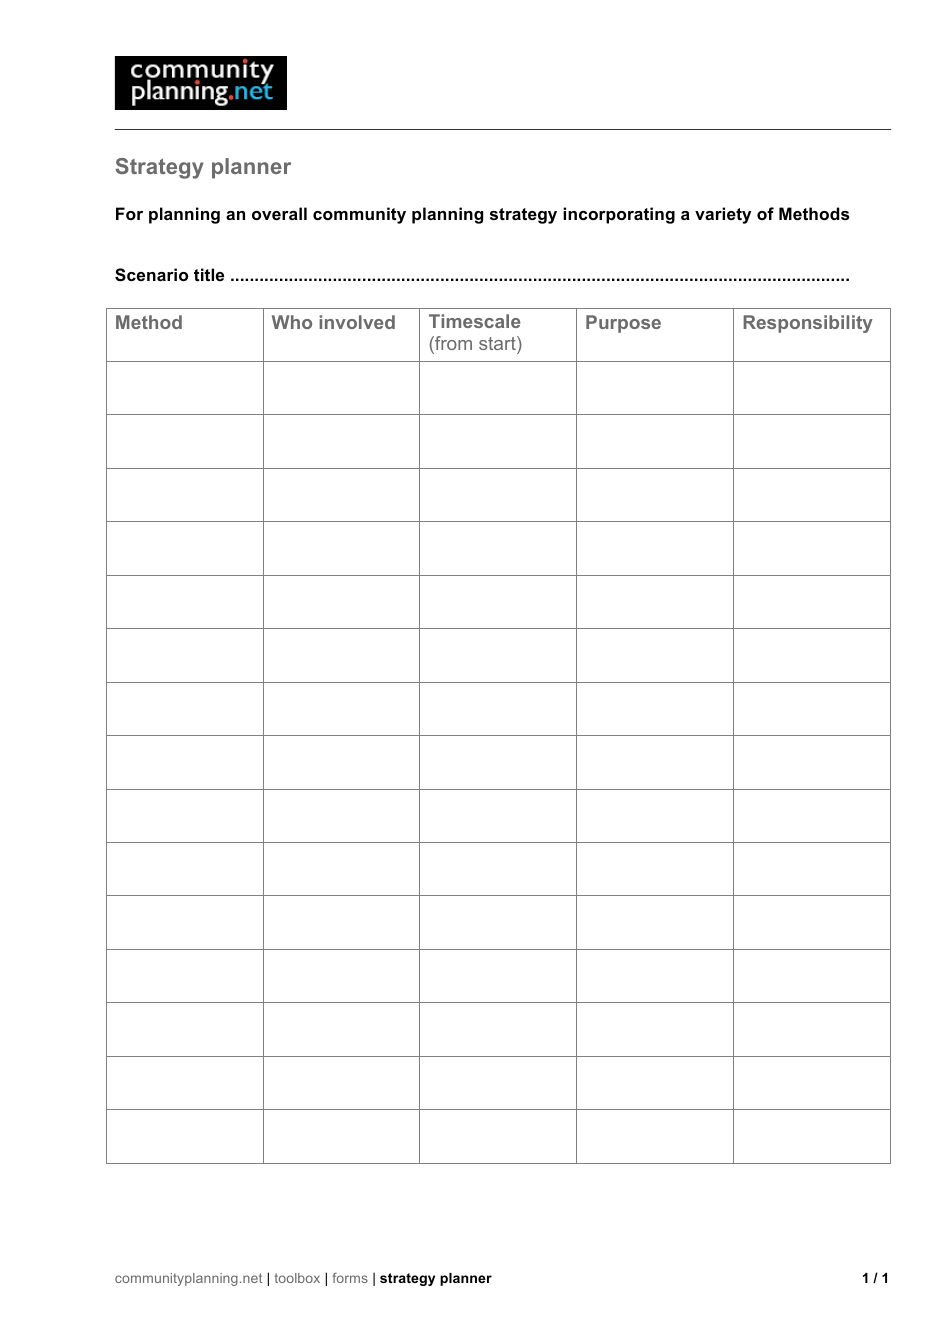 Community Strategy Planner Template- A comprehensive visual document for effective community planning